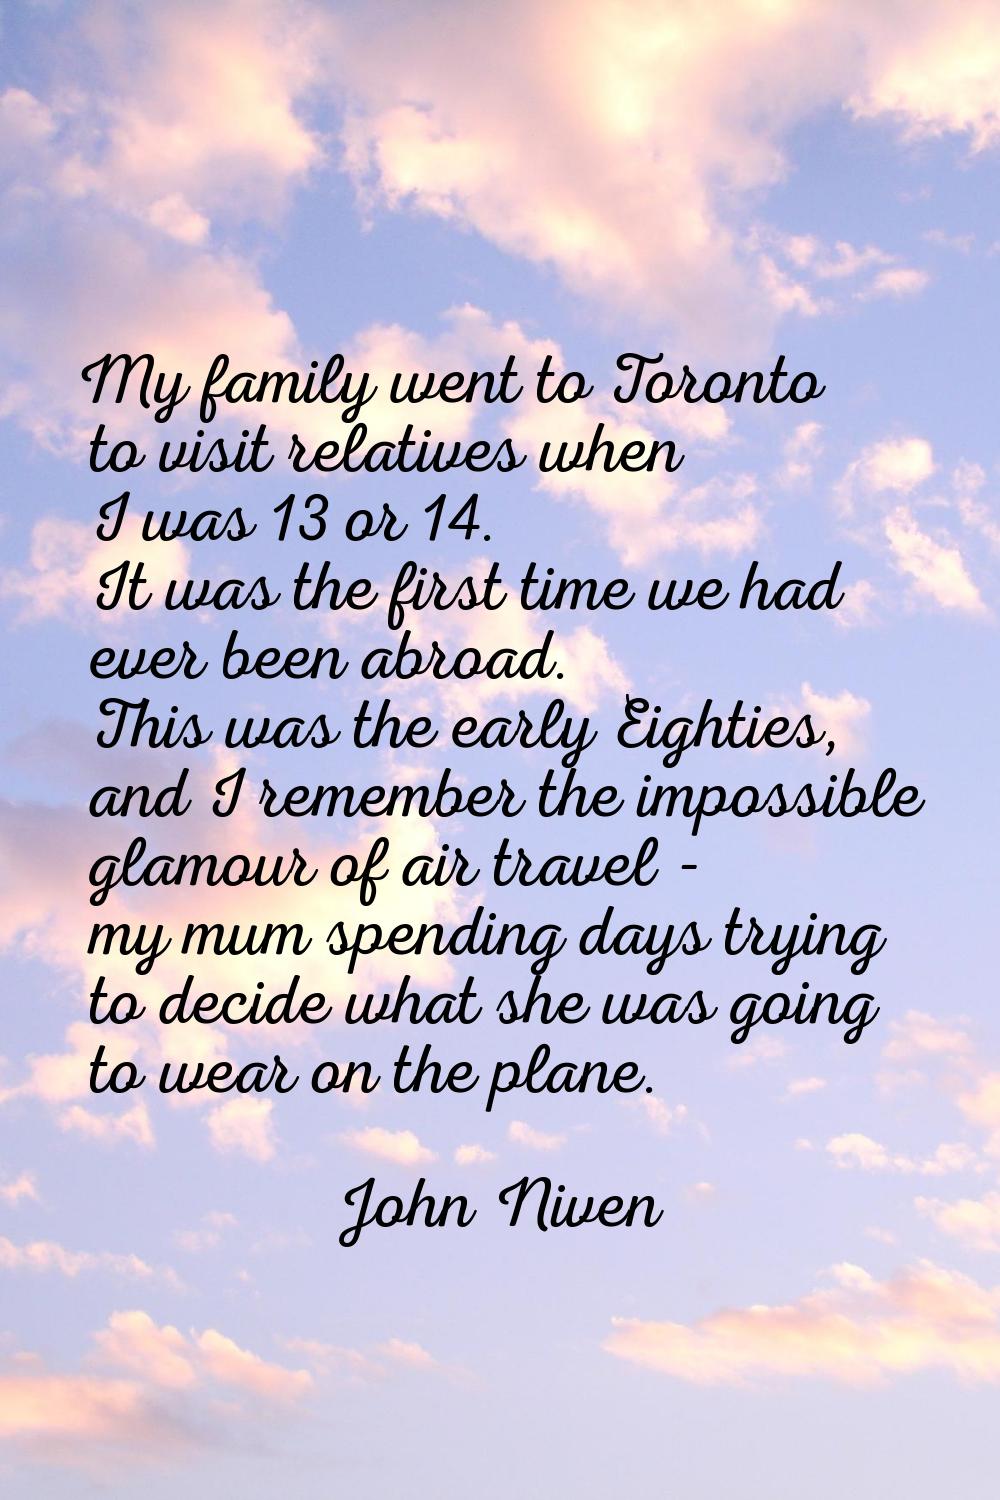 My family went to Toronto to visit relatives when I was 13 or 14. It was the first time we had ever